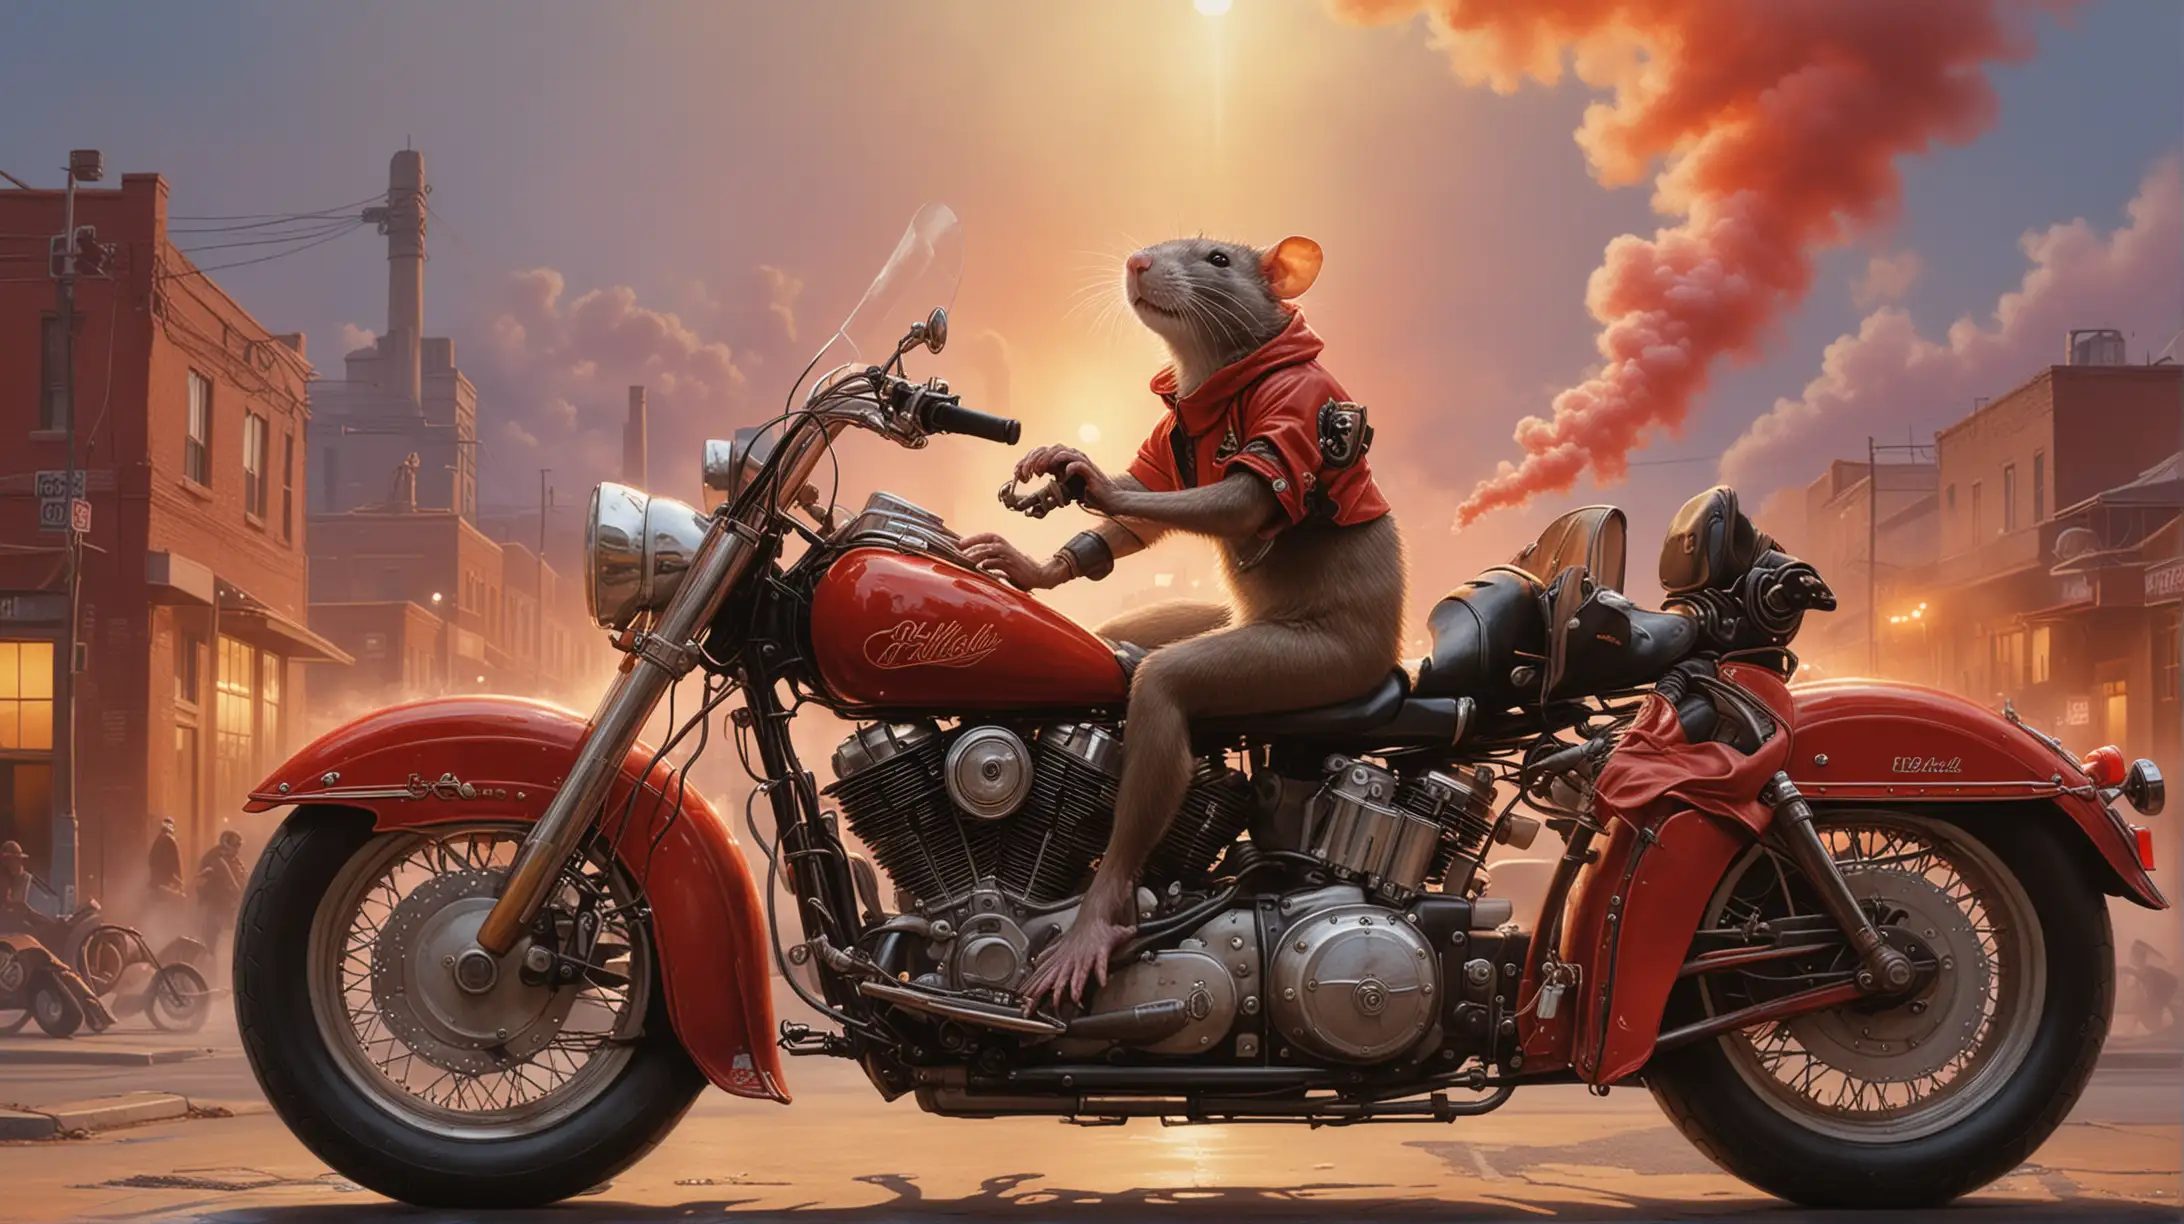 David Uhl realistic painting depicting a rat sitting on a Harley Electra motorcycle and red smoke mist in double exposure style, in miniswimwear, at a industrial city, low angle view, highly detailed, high contrast